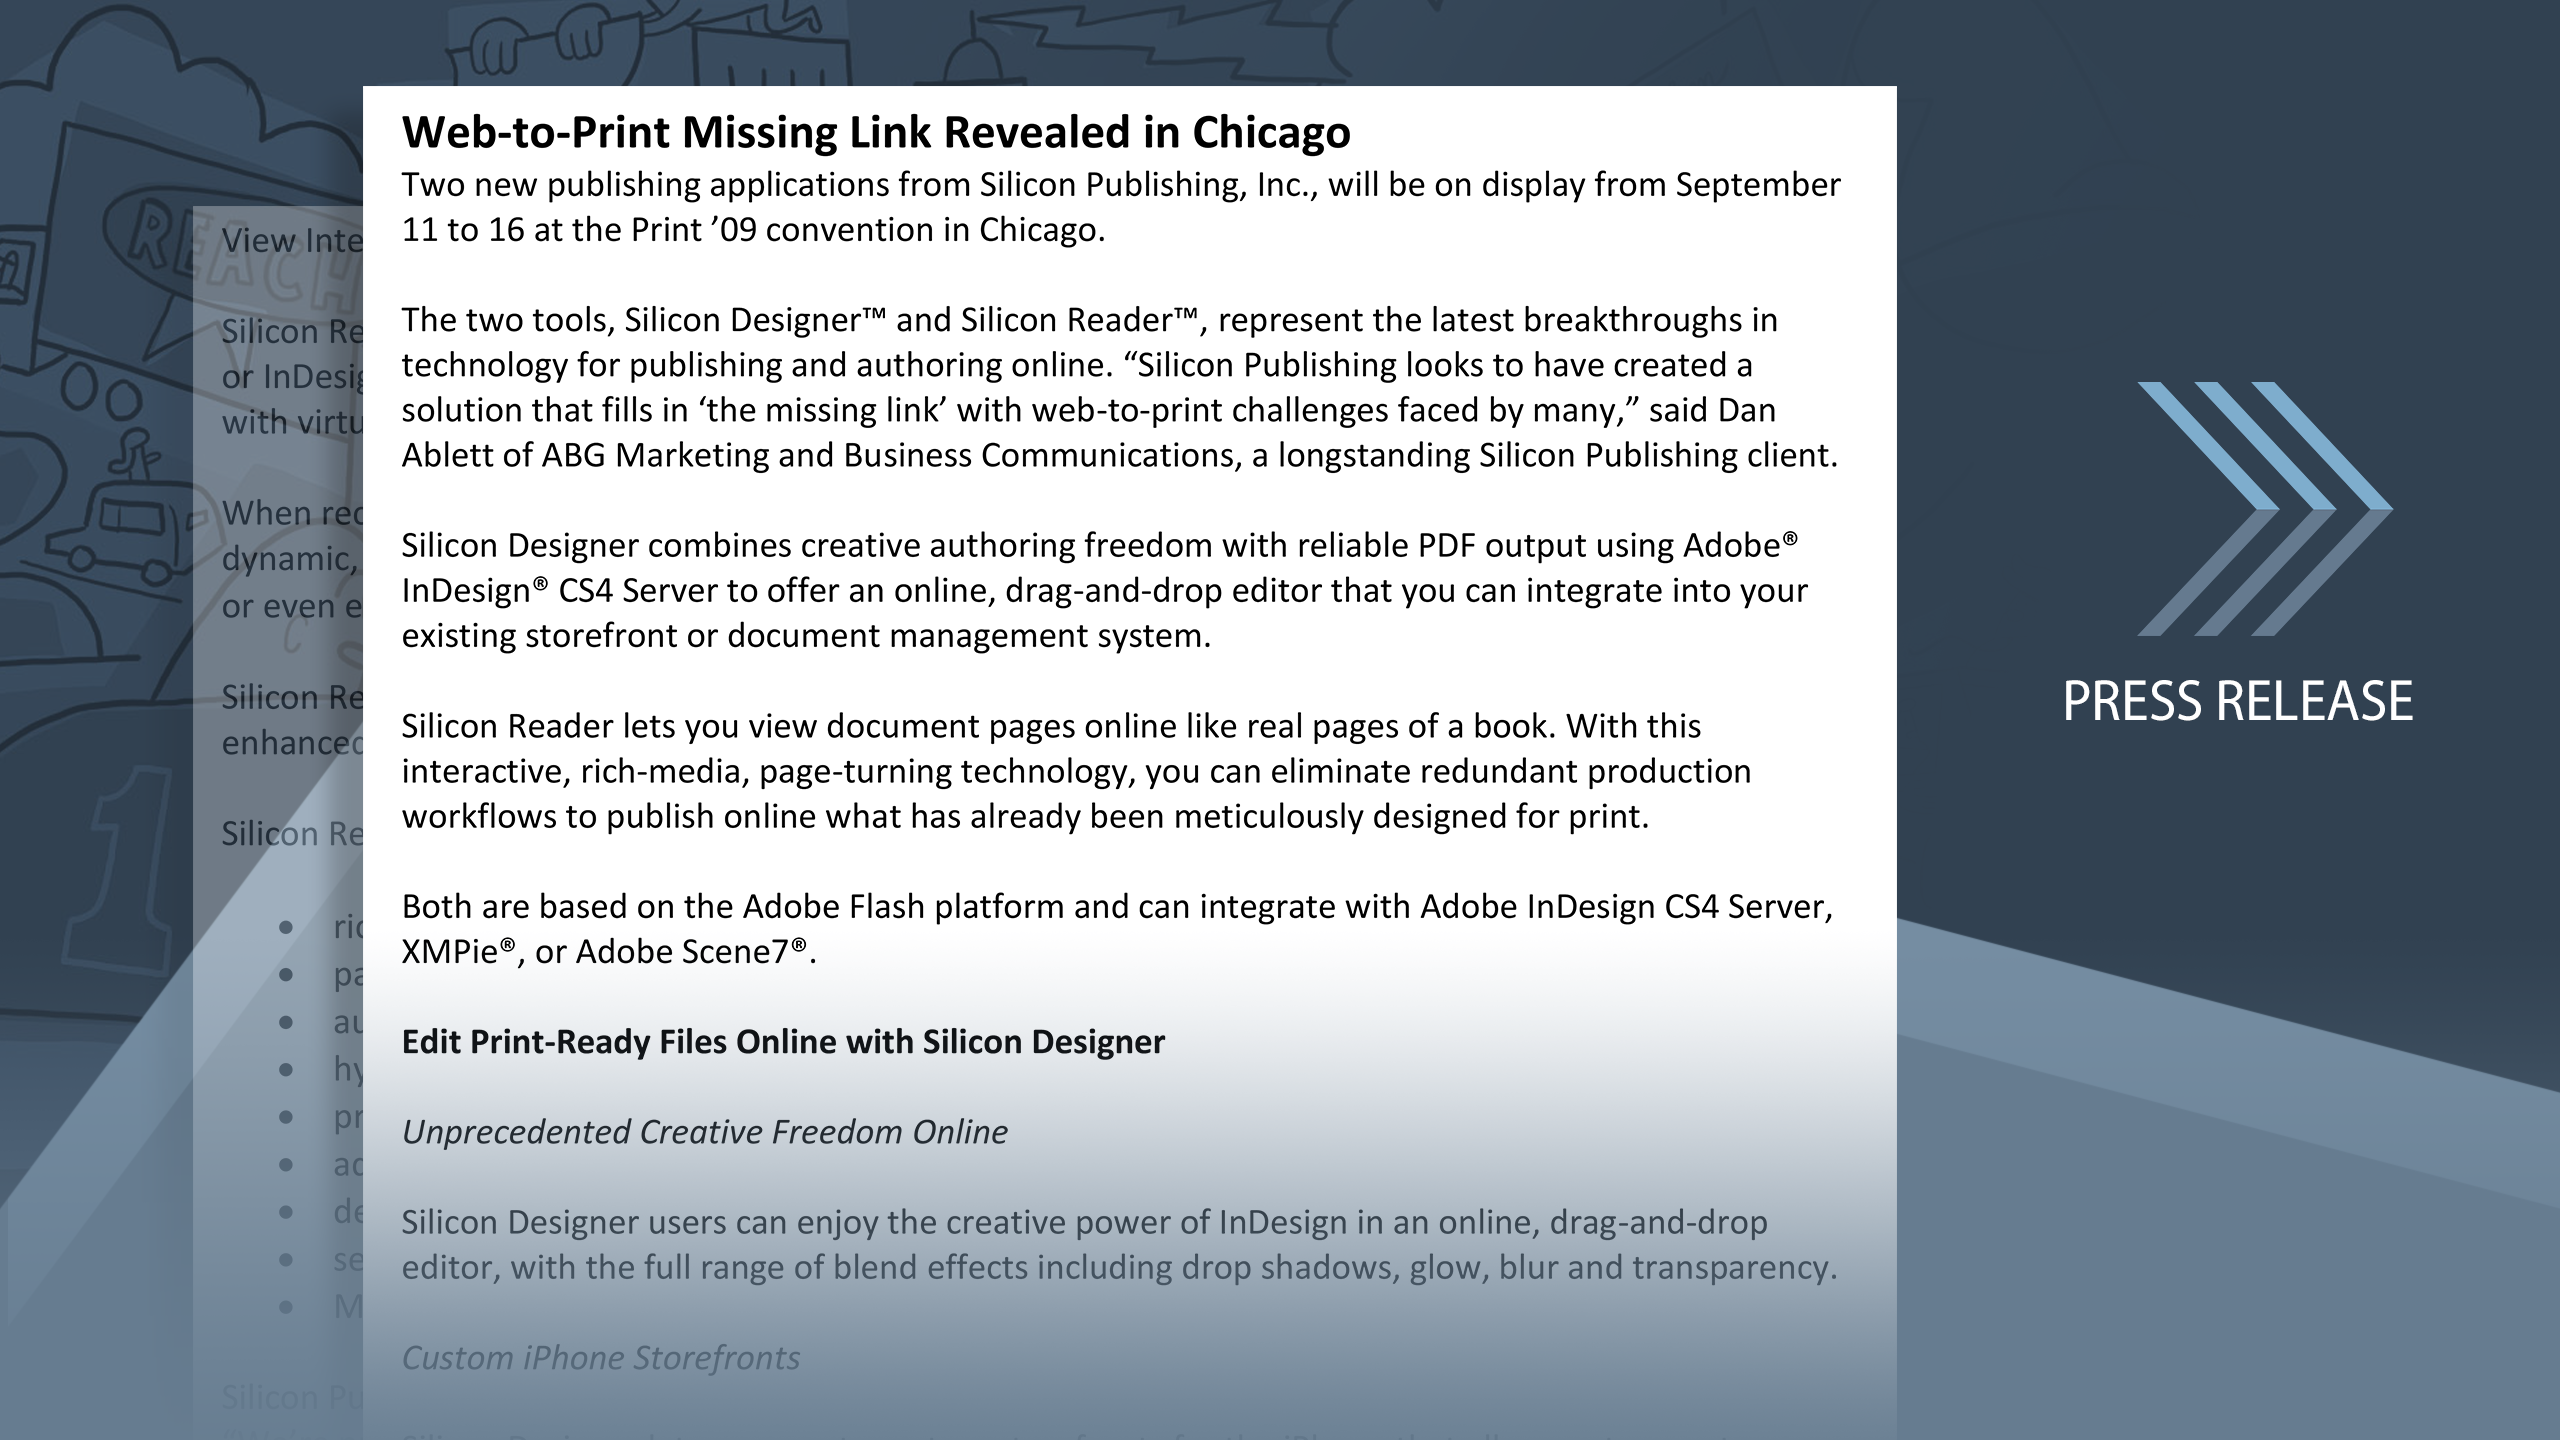 Web-to-Print Missing Link